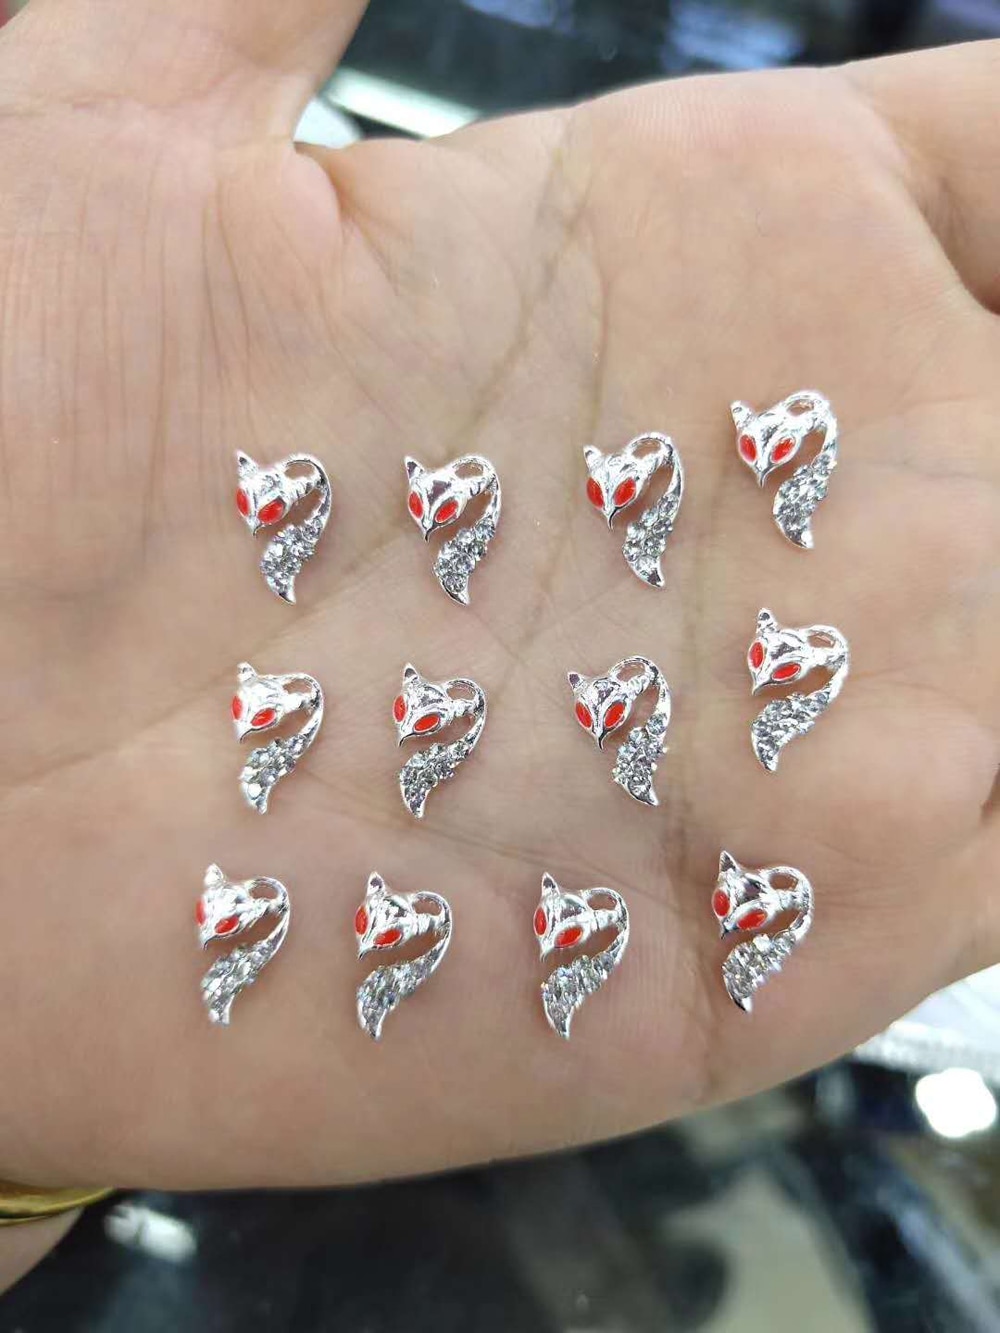 10Pc Vlinder Strass Nail Charm-Strass Nail Charms Animal/Vos Met Steen Meerdere Bedels Voor Nail Art, #3 Stijlen